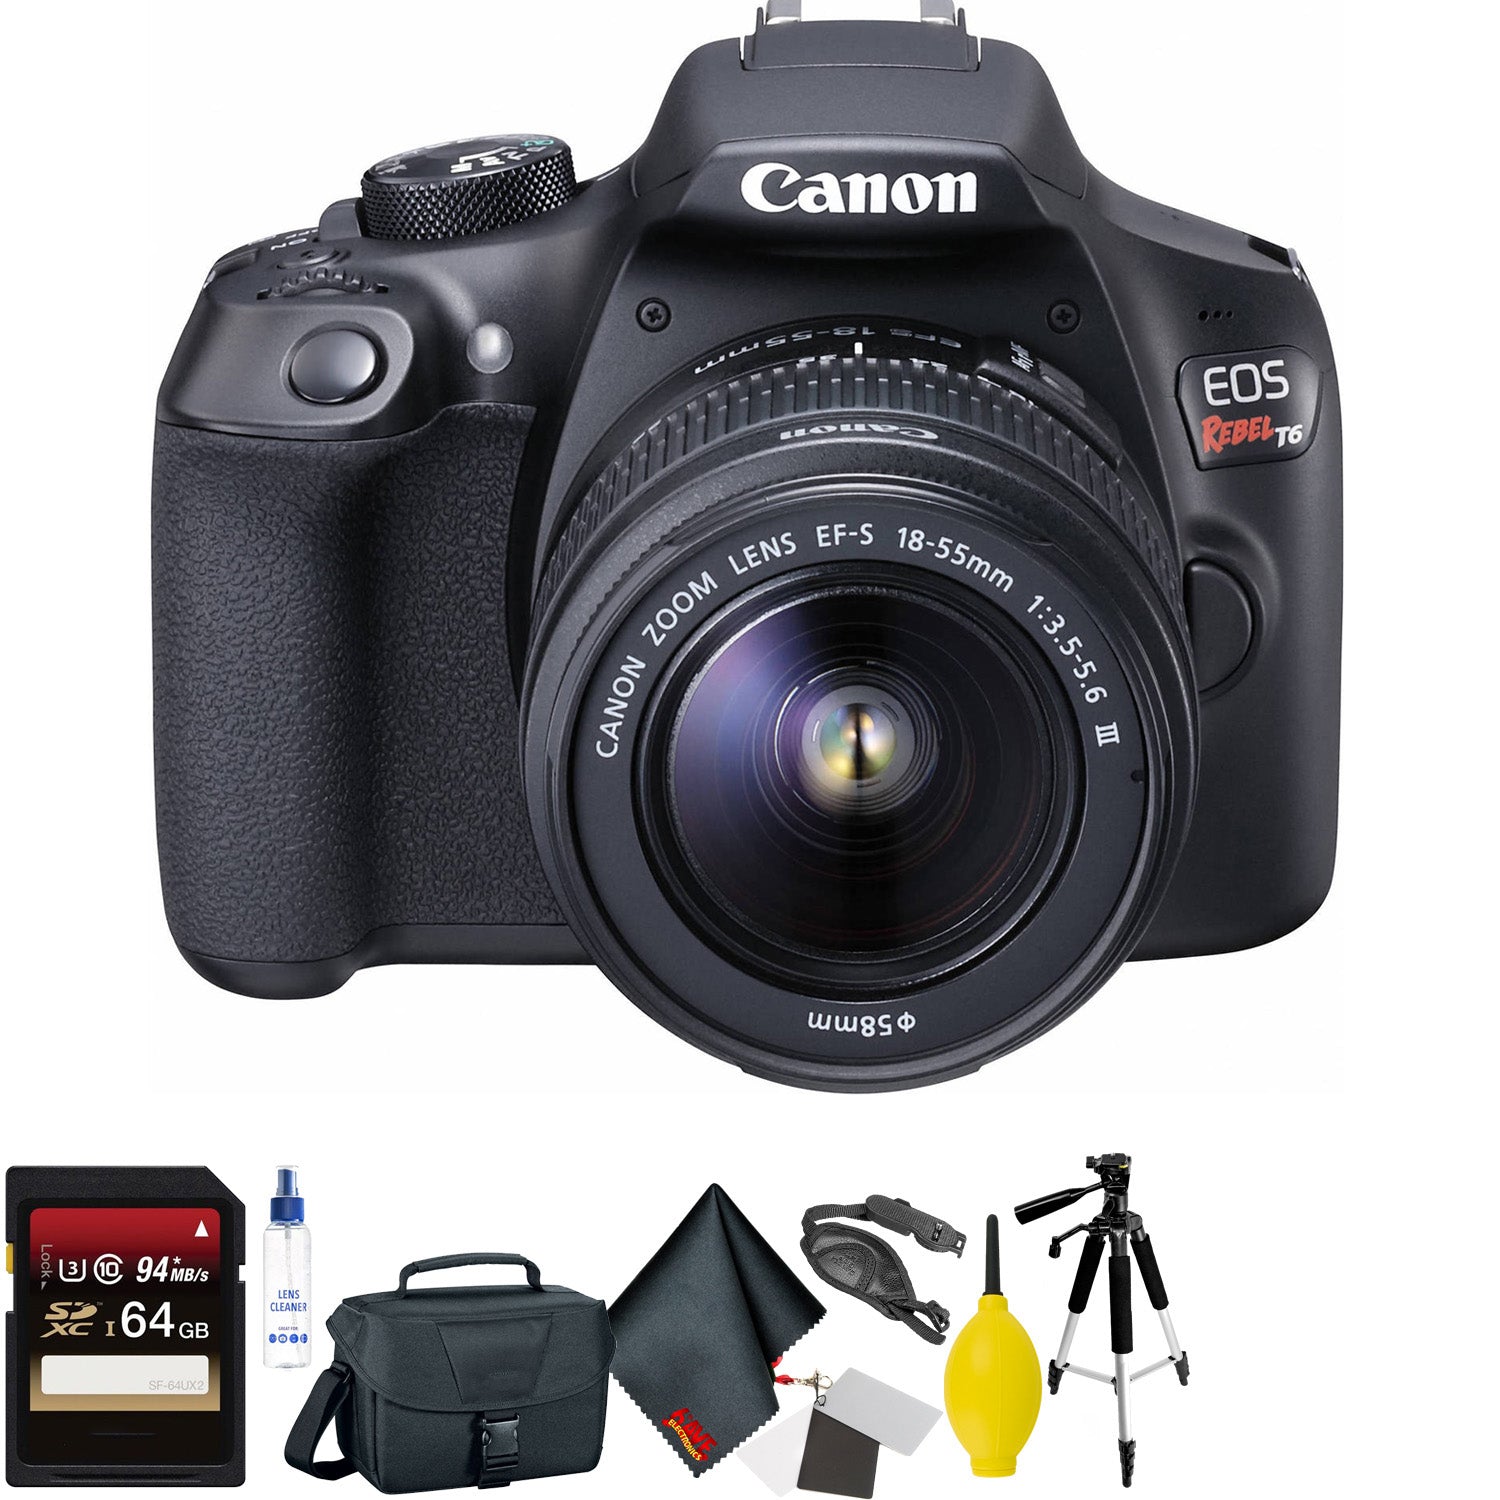 Canon EOS Rebel T6 DSLR Camera with 18-55mm and 75-300mm Lenses Kit + 64GB Memory Card + Mega Accessory Kit + 2 Year Accidental Warranty Bundle